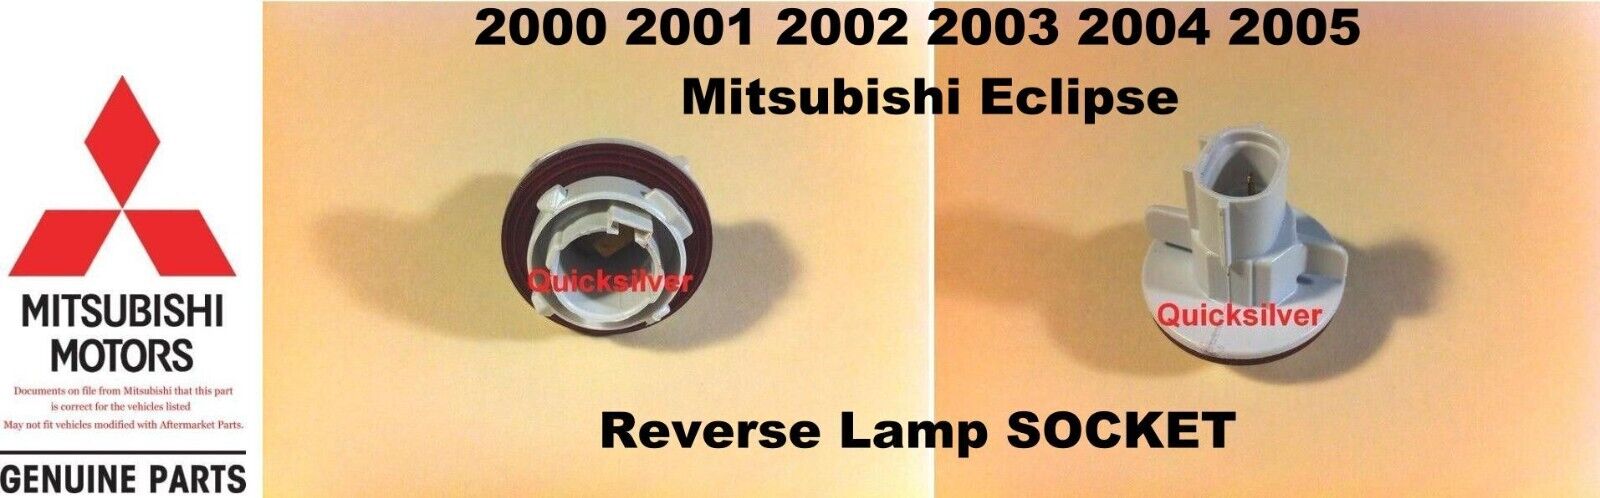 2000 2005 Mitsubishi Eclipse GT GTS Reverse Lamp Socket 1 Only New OEM